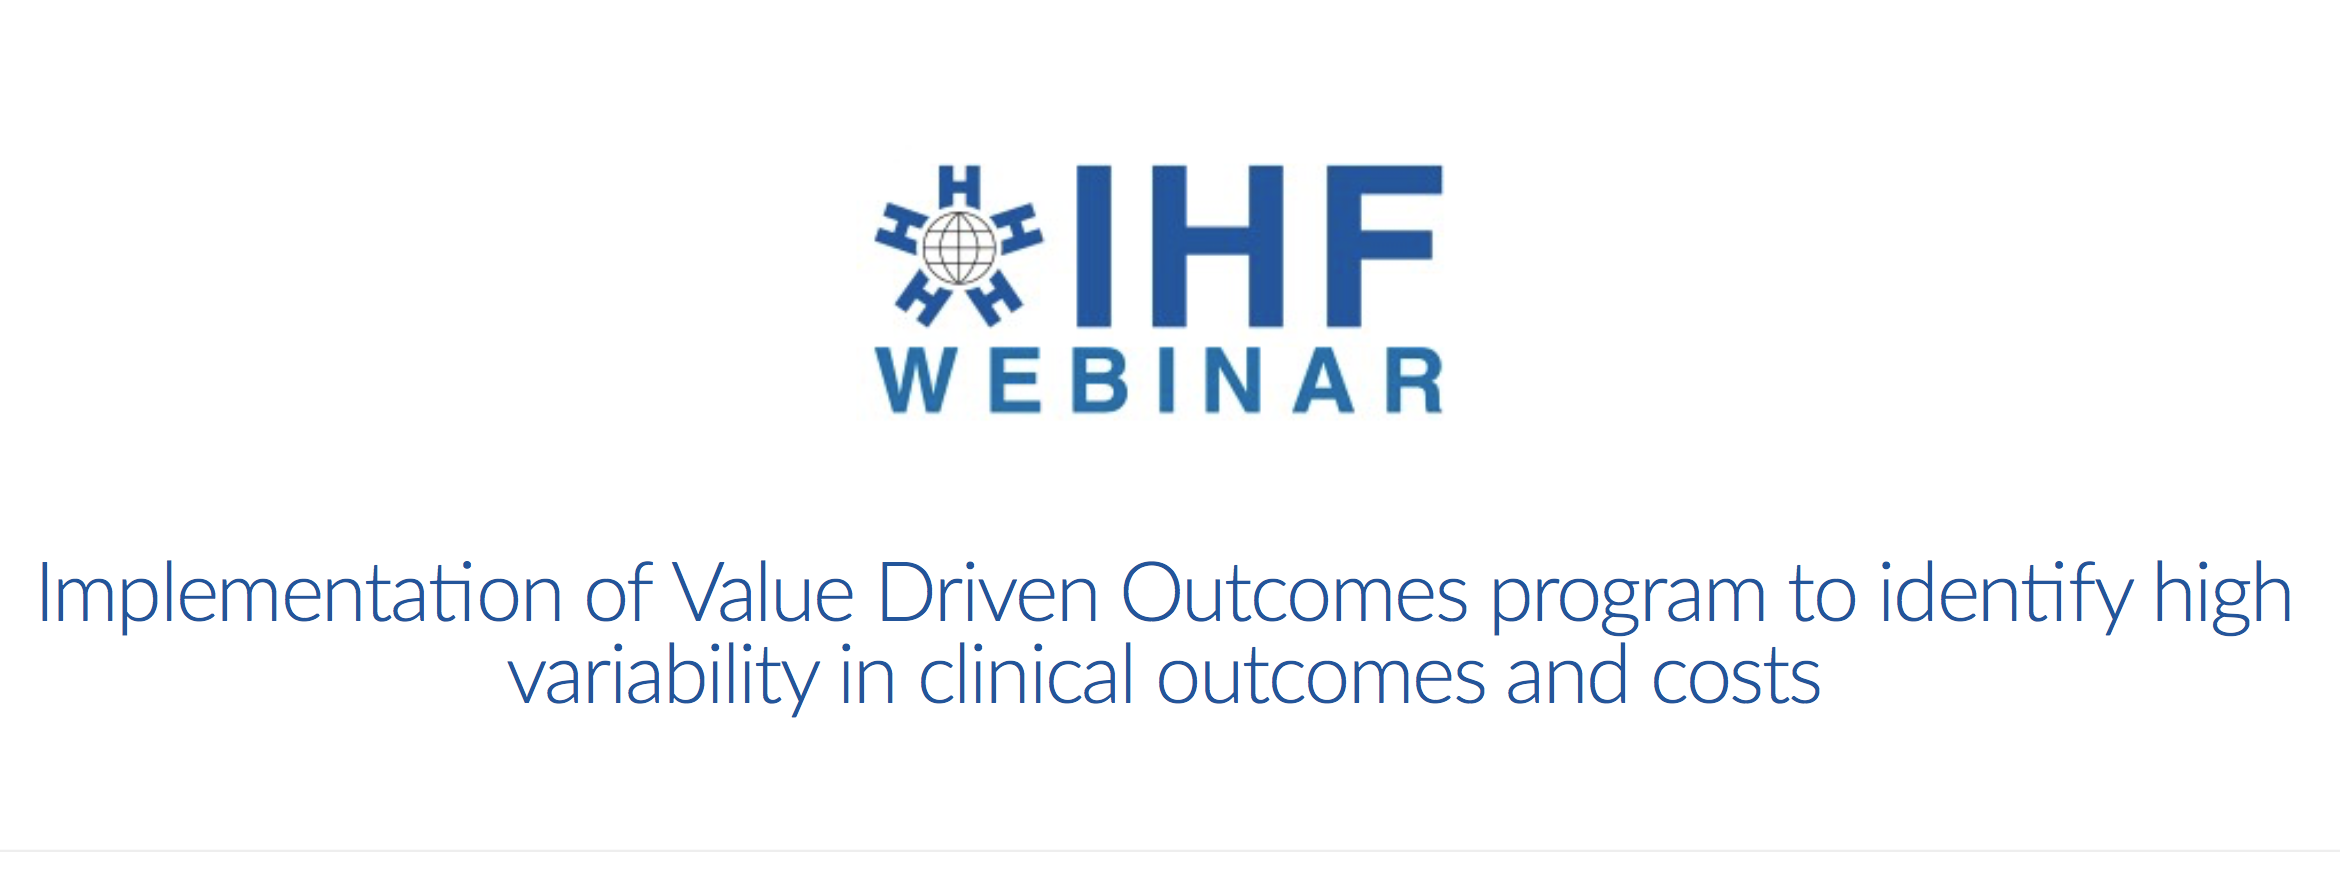 Webinar | Implementation of Value Driven Outcomes program to identify high variability in clinical outcomes and costs